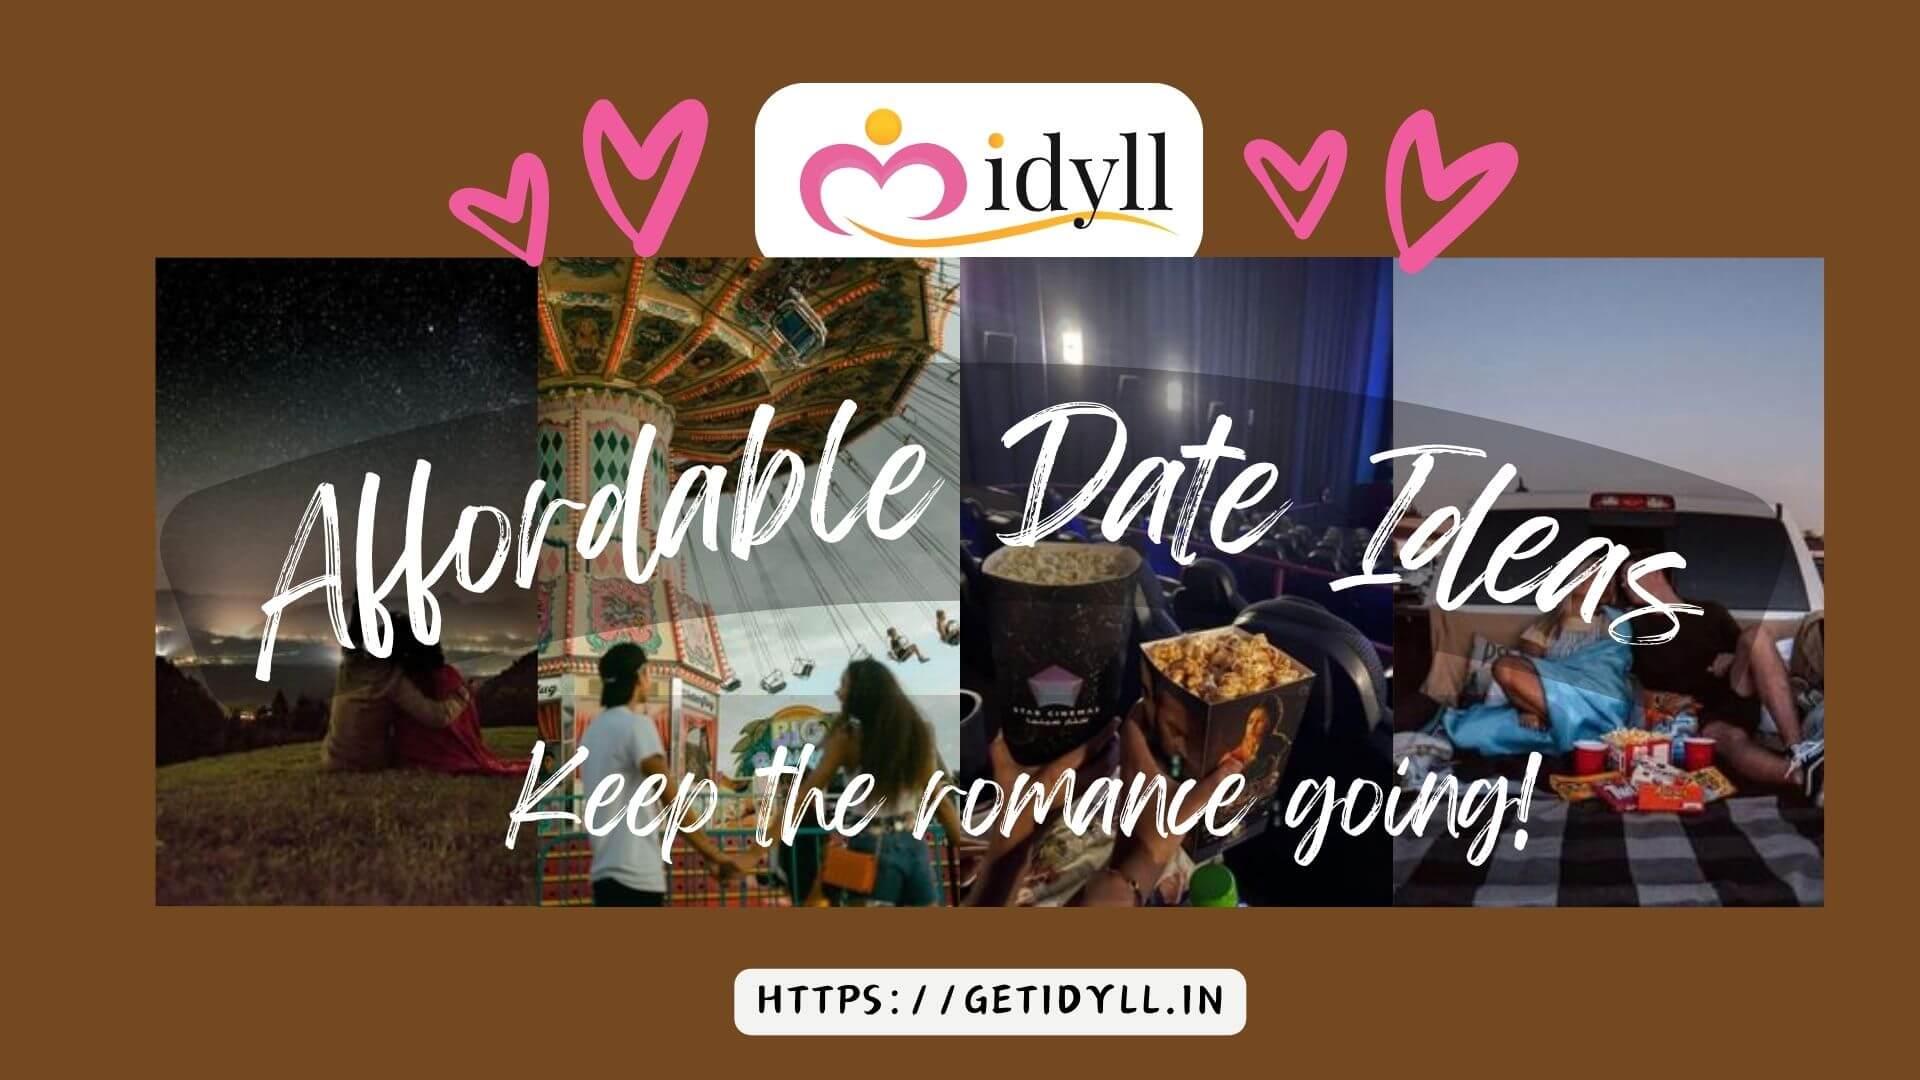 love, dates, cheap dates, affordable date ideas, dating, college dating, romance, idyll, idyll dating  